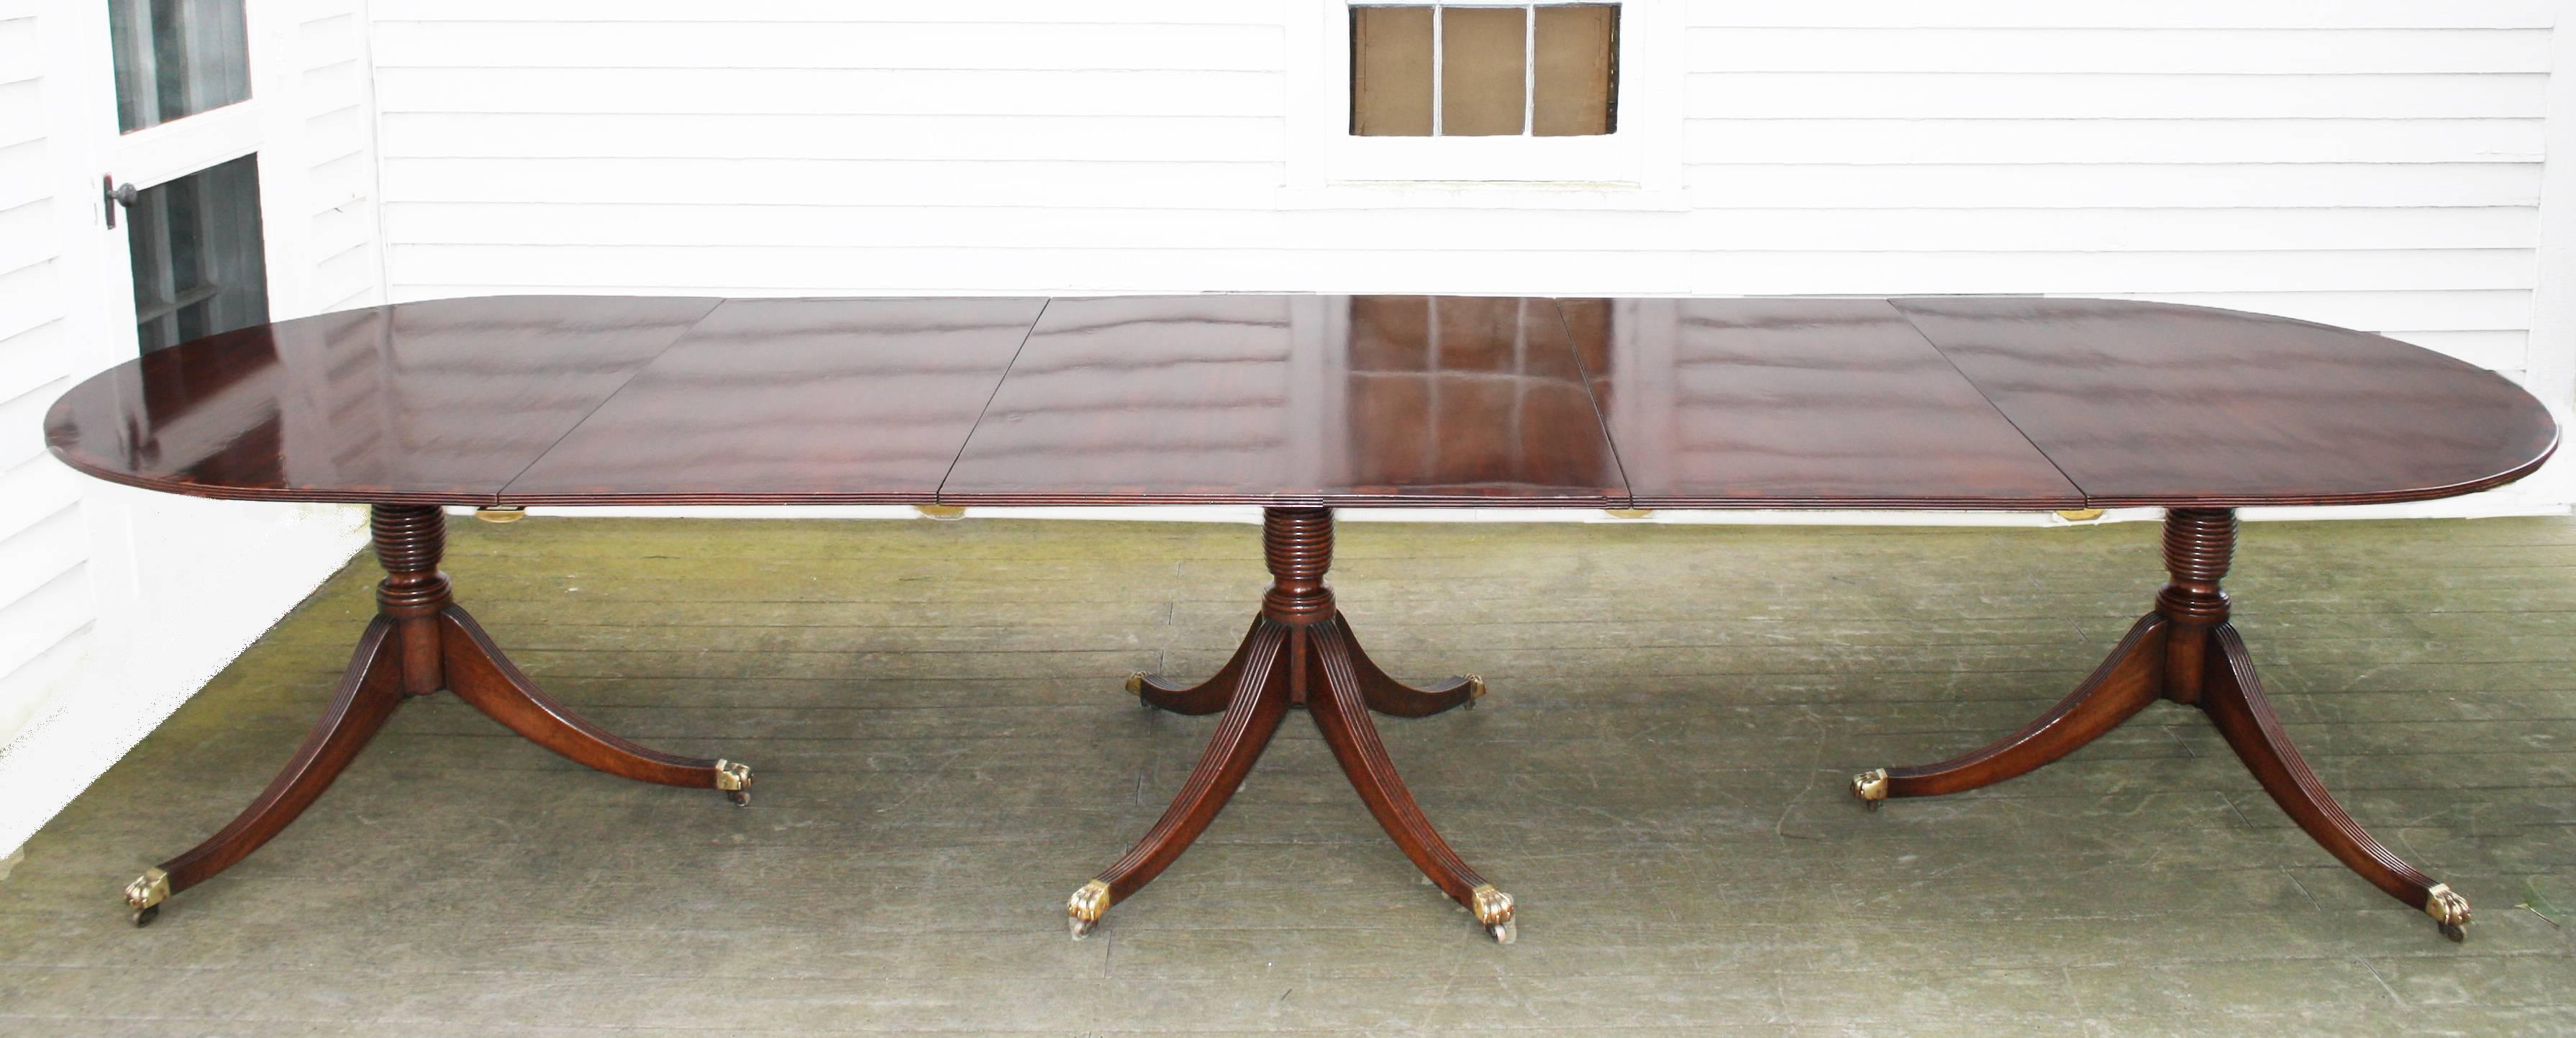 A solid mahogany hand-planed, carved and turned triple pedestal banquet table, with two 23.75